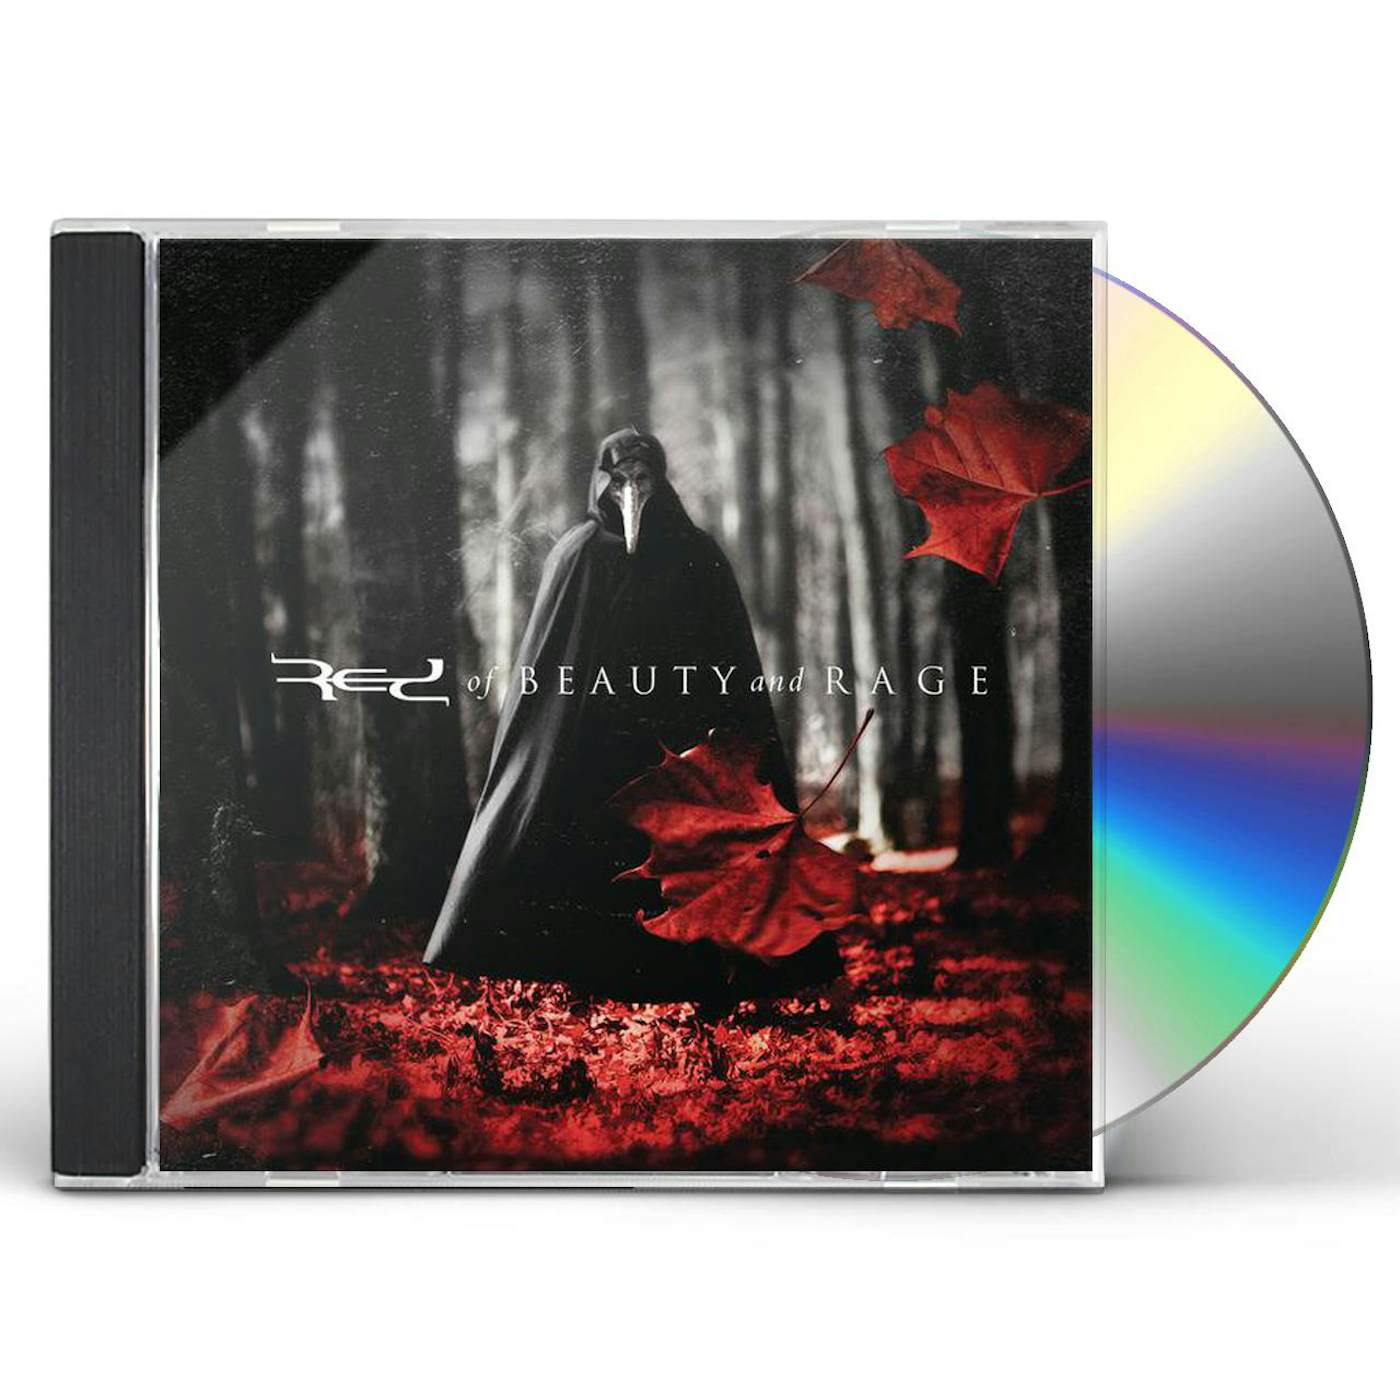 Red OF BEAUTY & RAGE CD